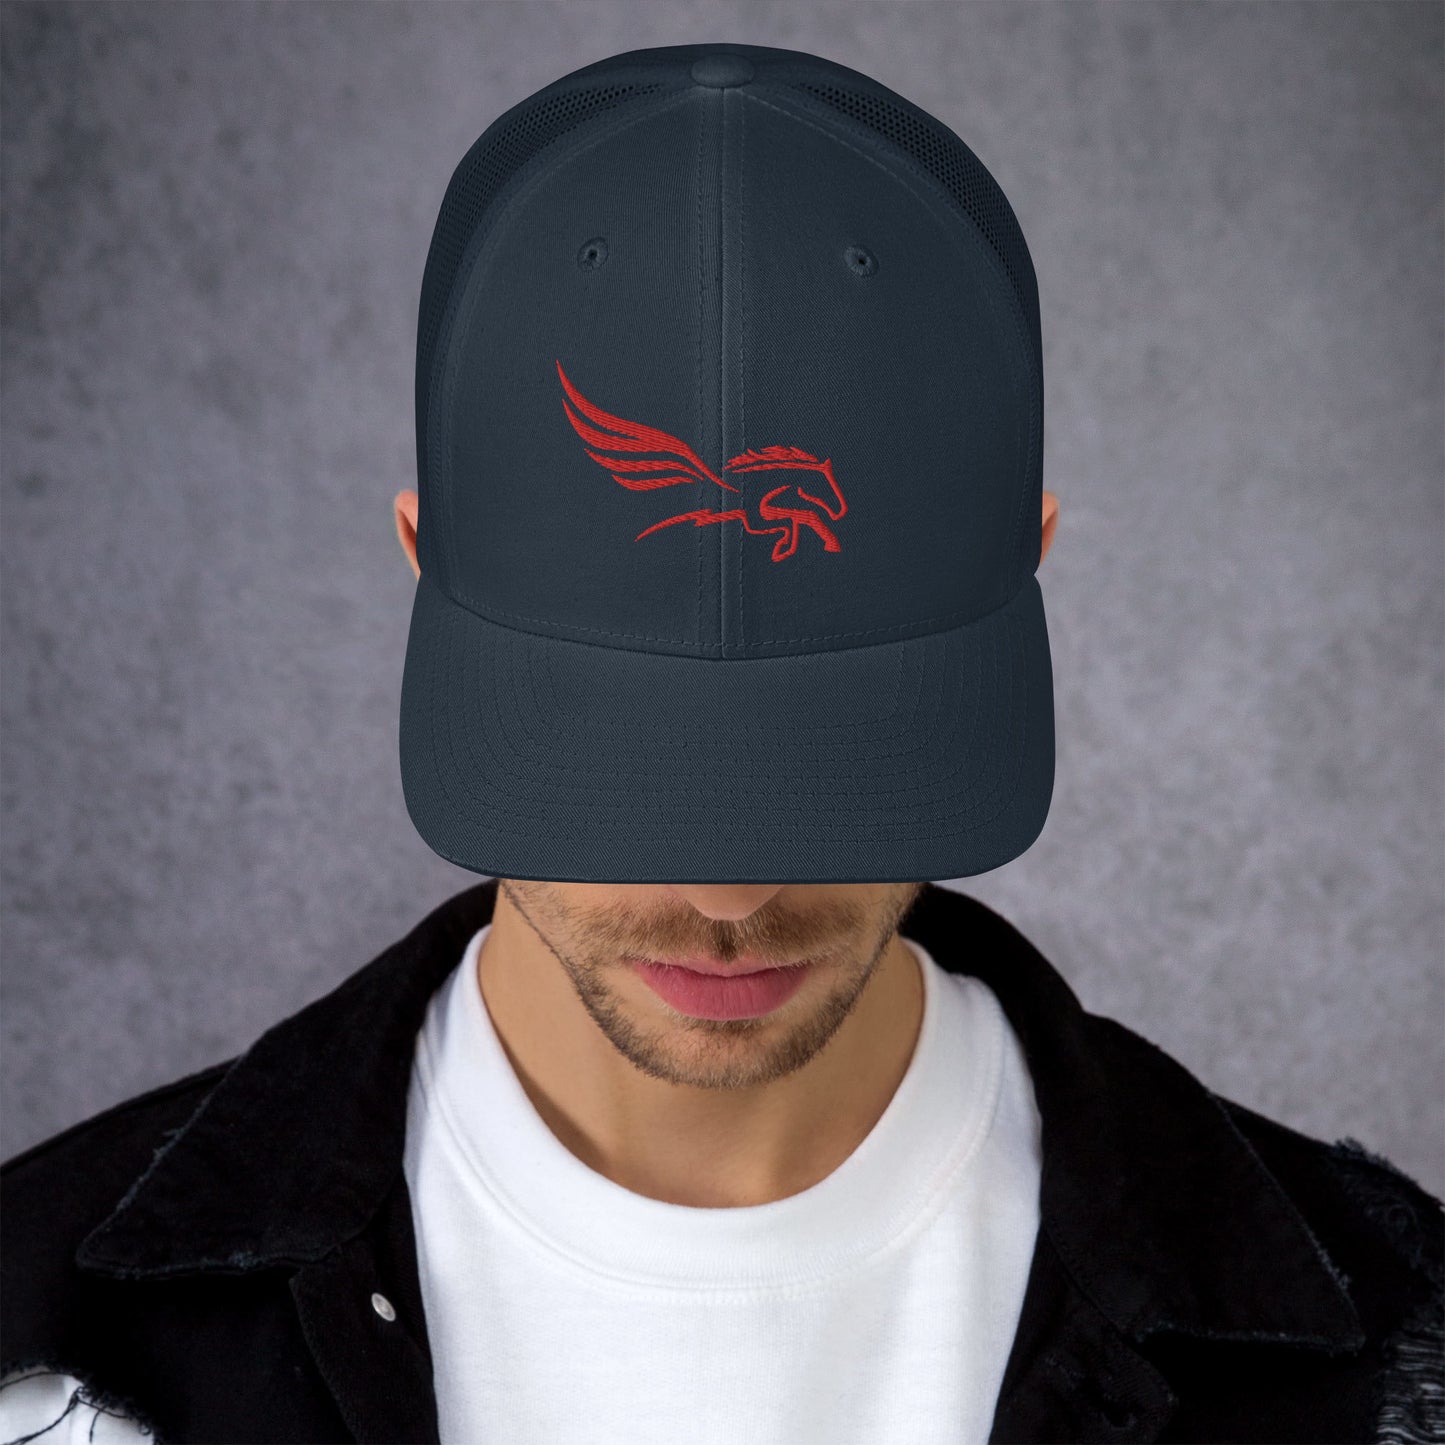 Large Red Percy - Trucker Cap